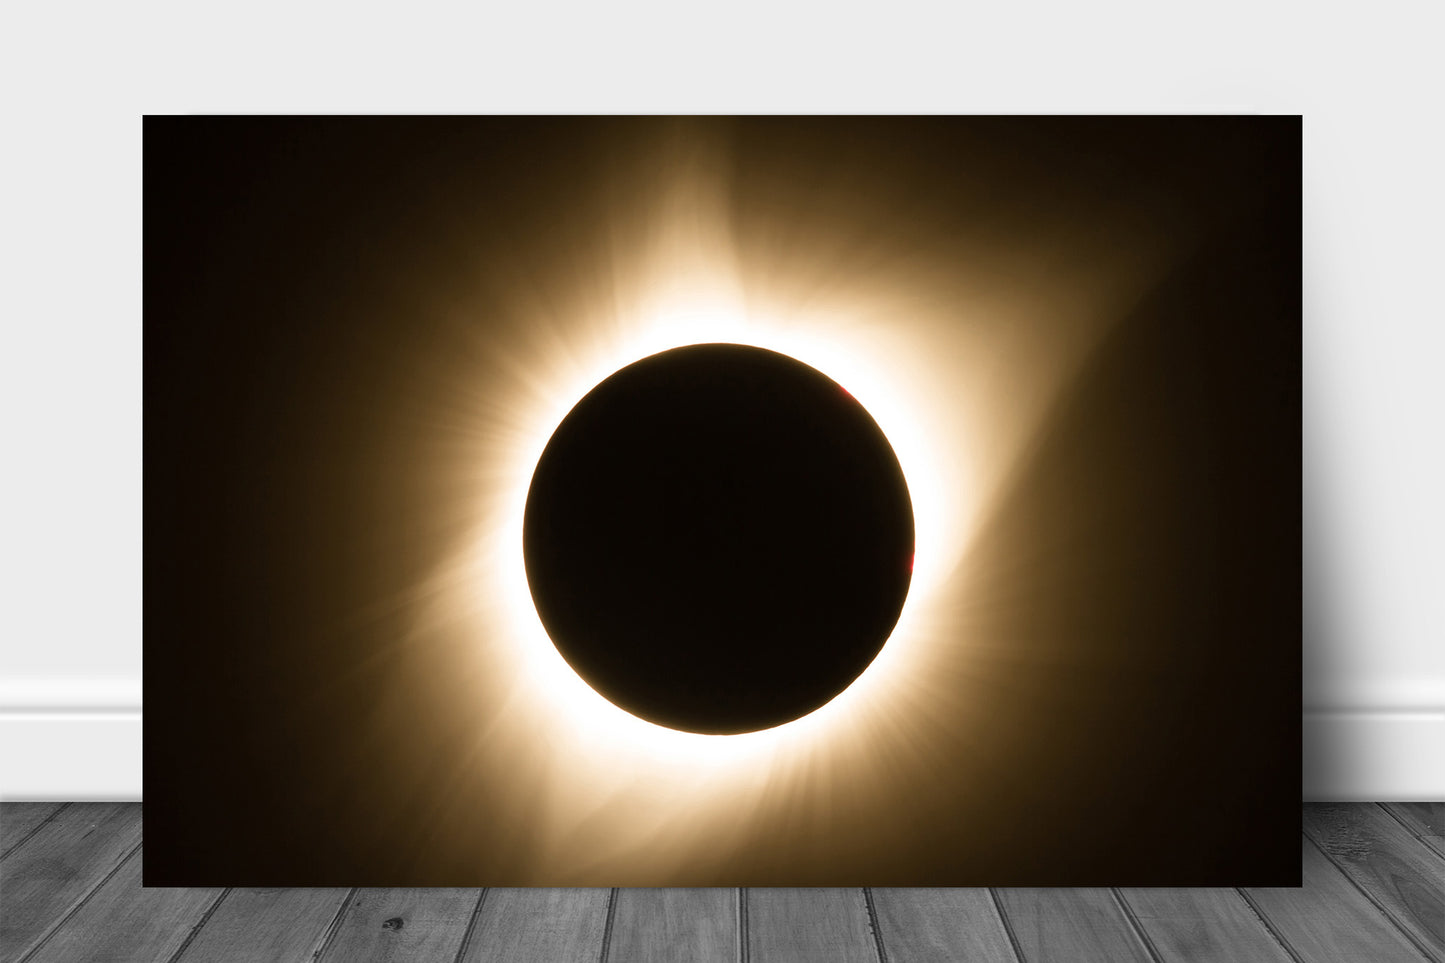 Celestial metal print wall art on aluminum of a total solar eclipse with bright gold corona by Sean Ramsey of Southern Plains Photography.